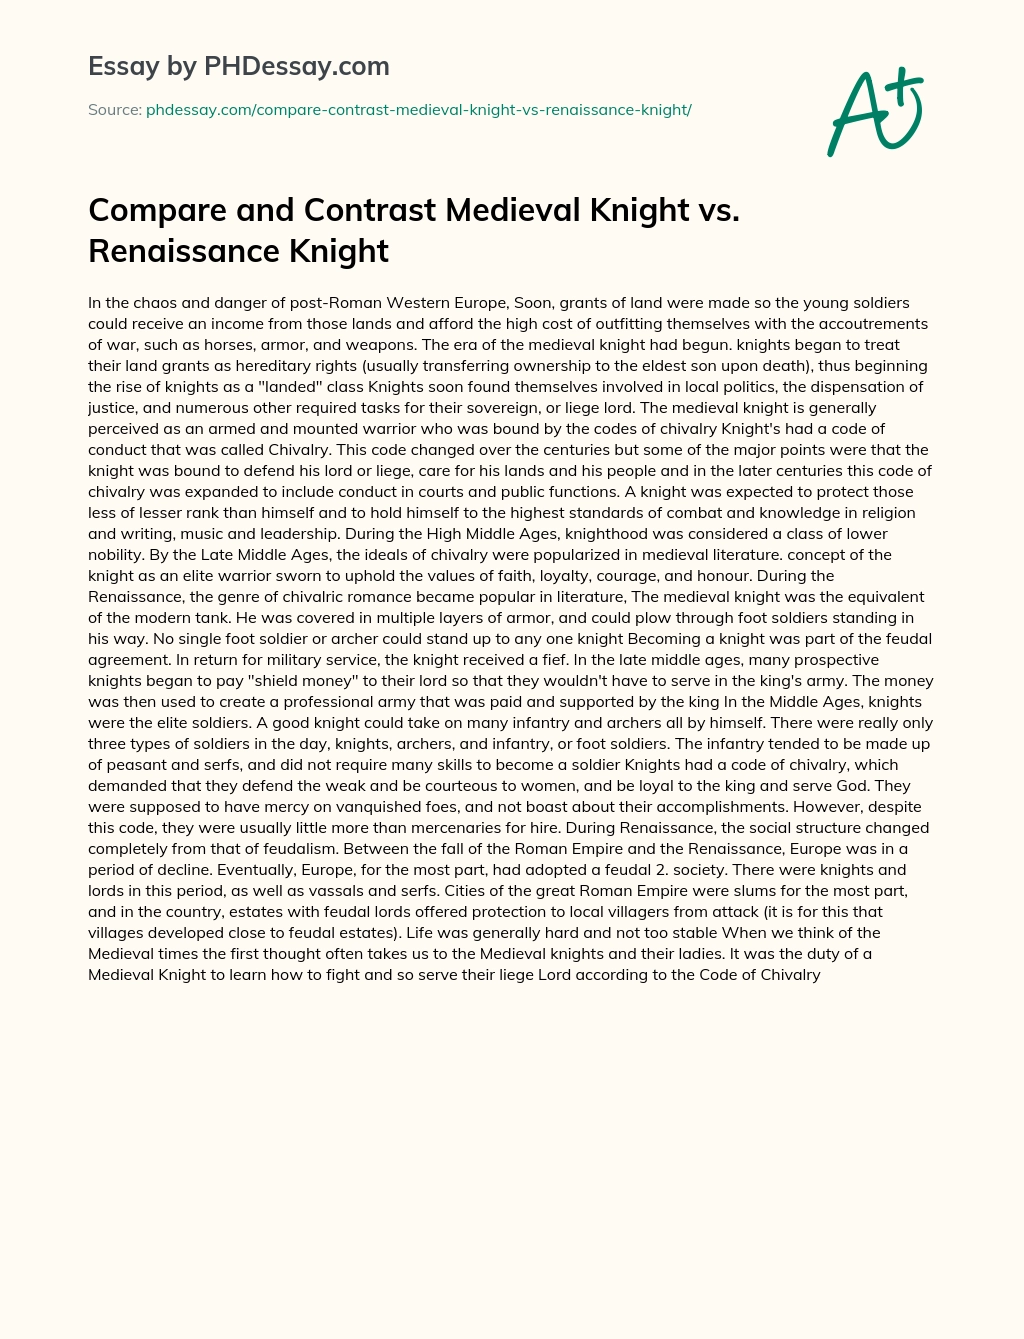 Compare and Contrast Medieval Knight vs. Renaissance Knight essay